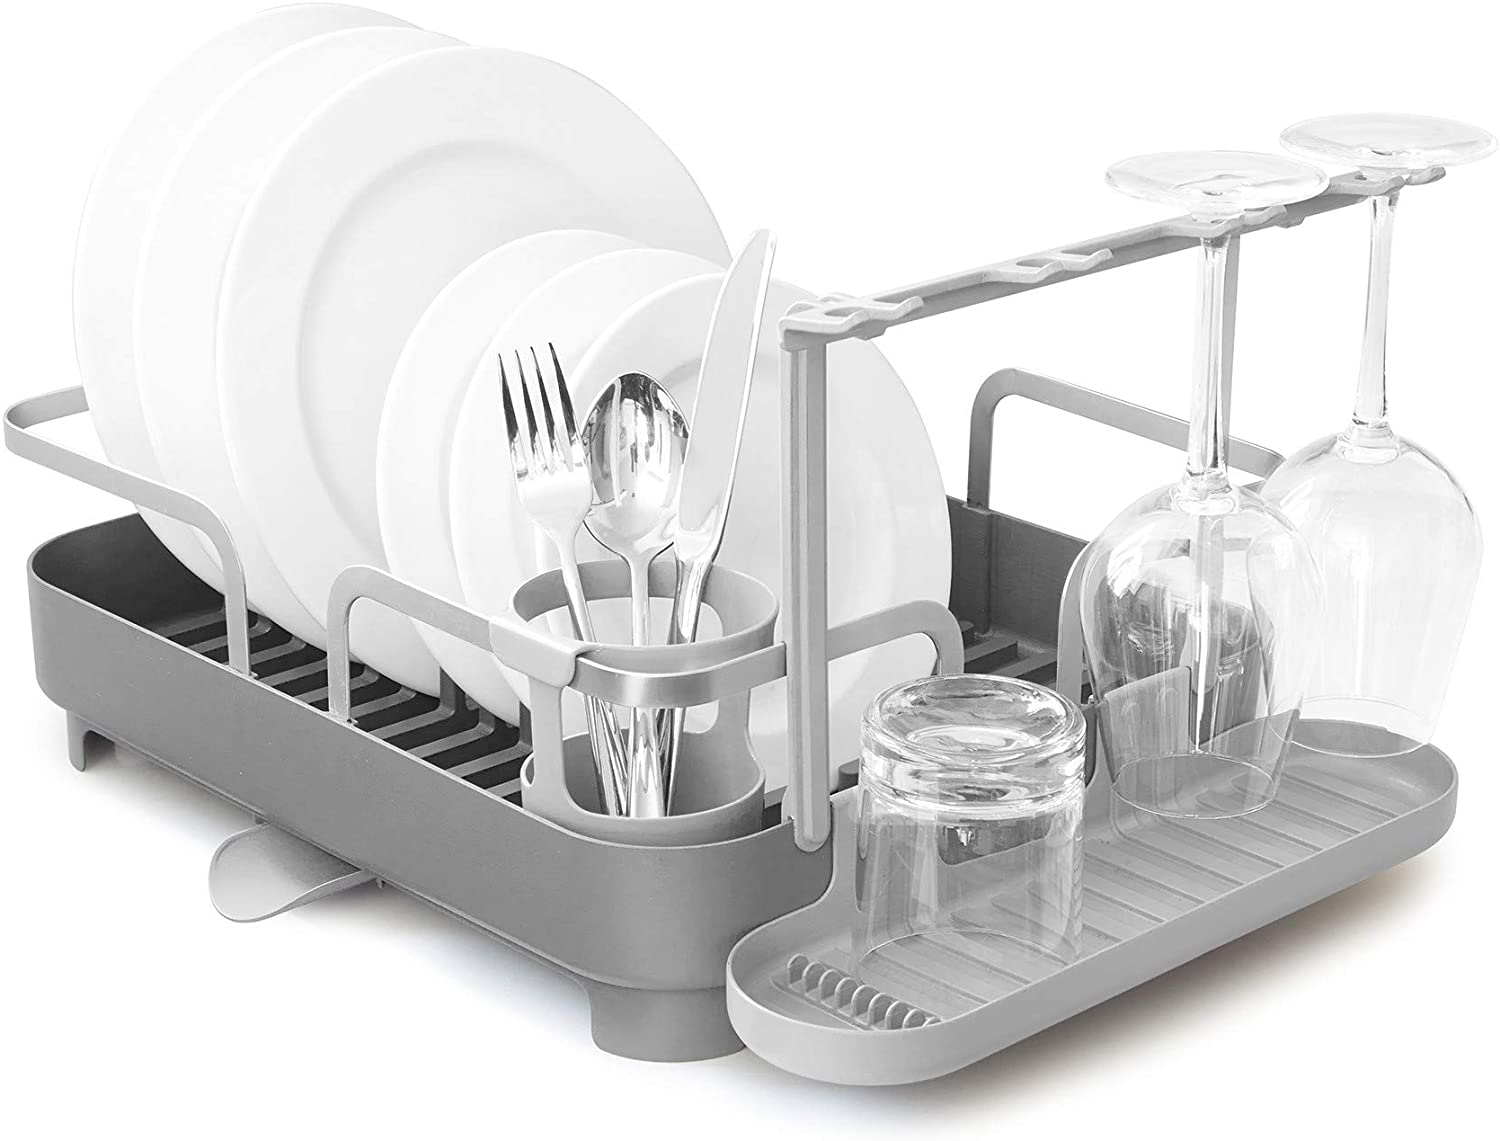 Umbra Holster Dish Drainer with Integrated Drip Water Drainage, Moveable Glass Holder and Multi-Purpose Storage Compartment - Space-saving Draining Grid, Leaves No Dripping Water on Worktop, Grey